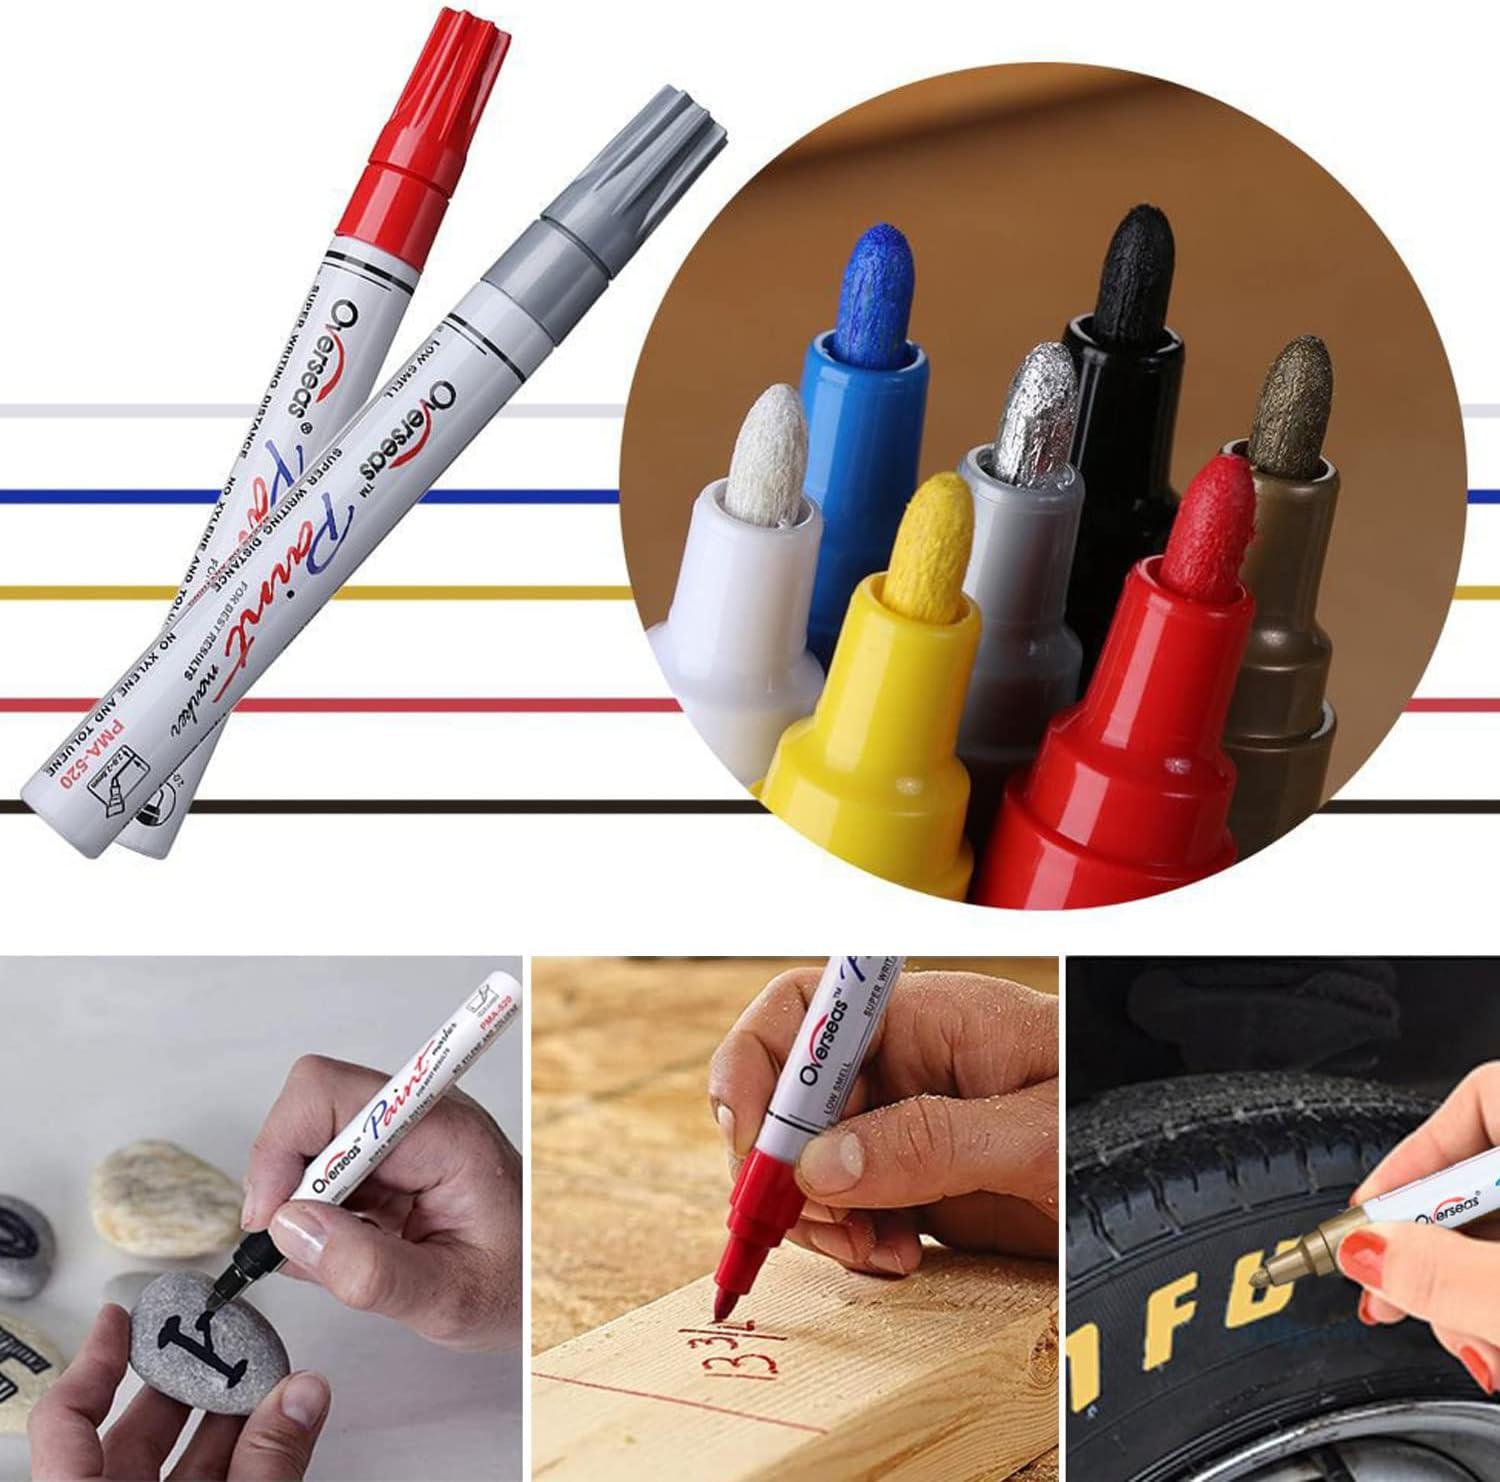 TFIVE Paint Pens Paint Markers Never Fade Quick Dry and